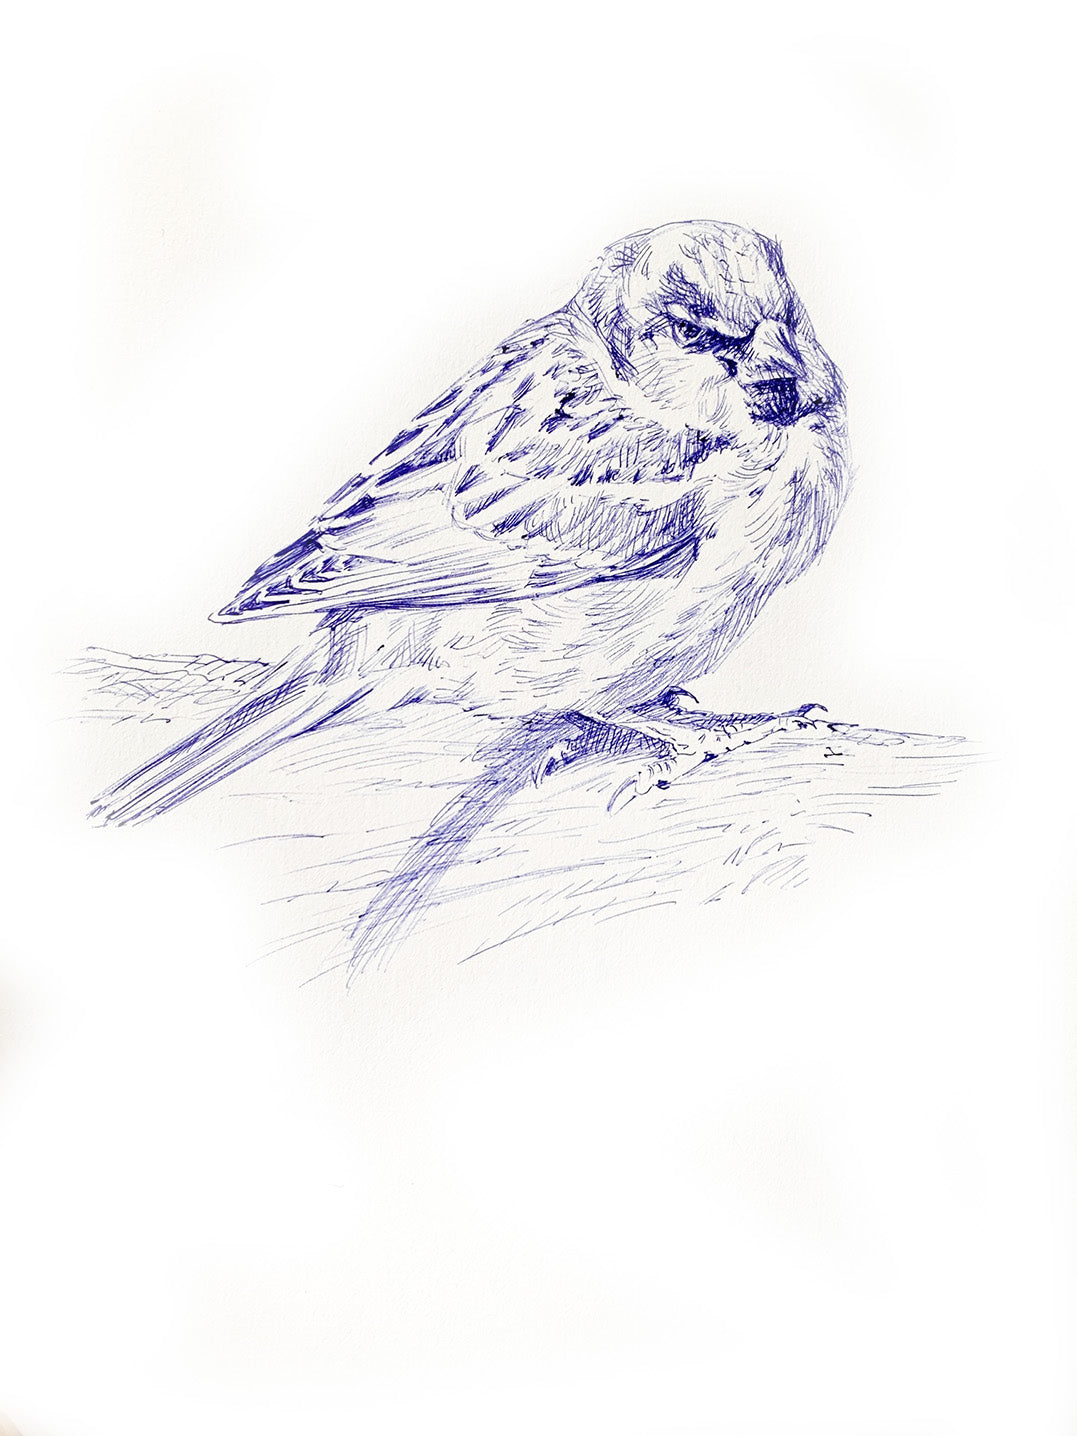 'House Sparrow’ - Original Ink Drawing by David Cemmick - 35 x 25cm